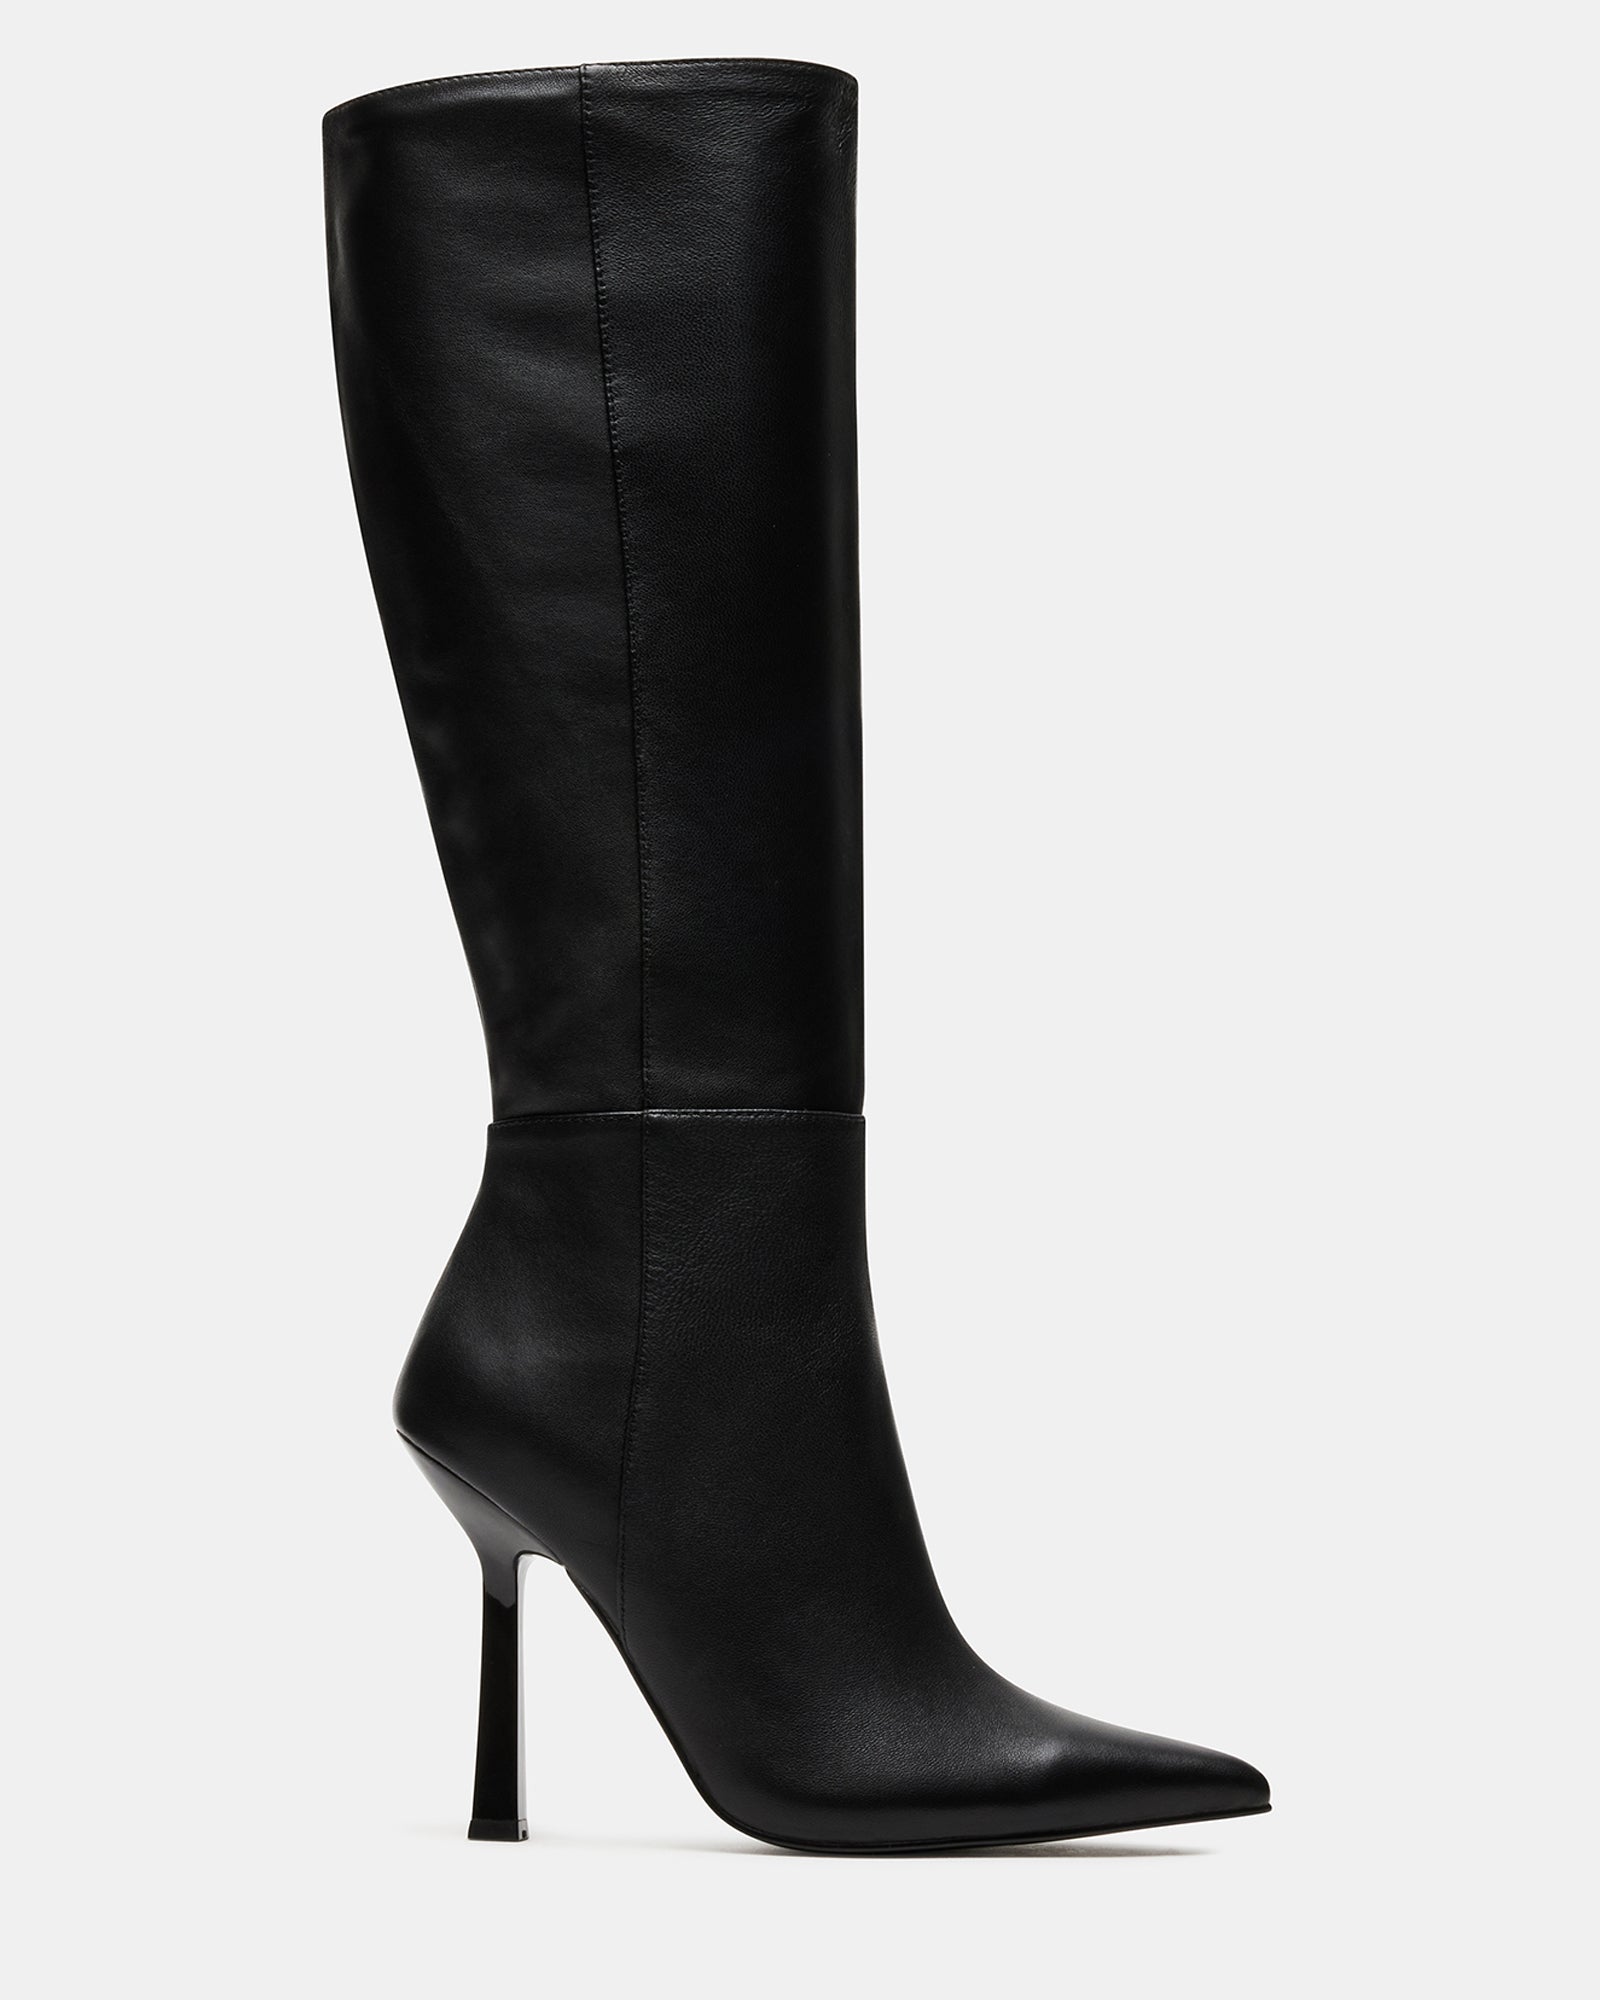 Black Boots - Faux Leather Knee-High Boots - High Heel Boots - Lulus